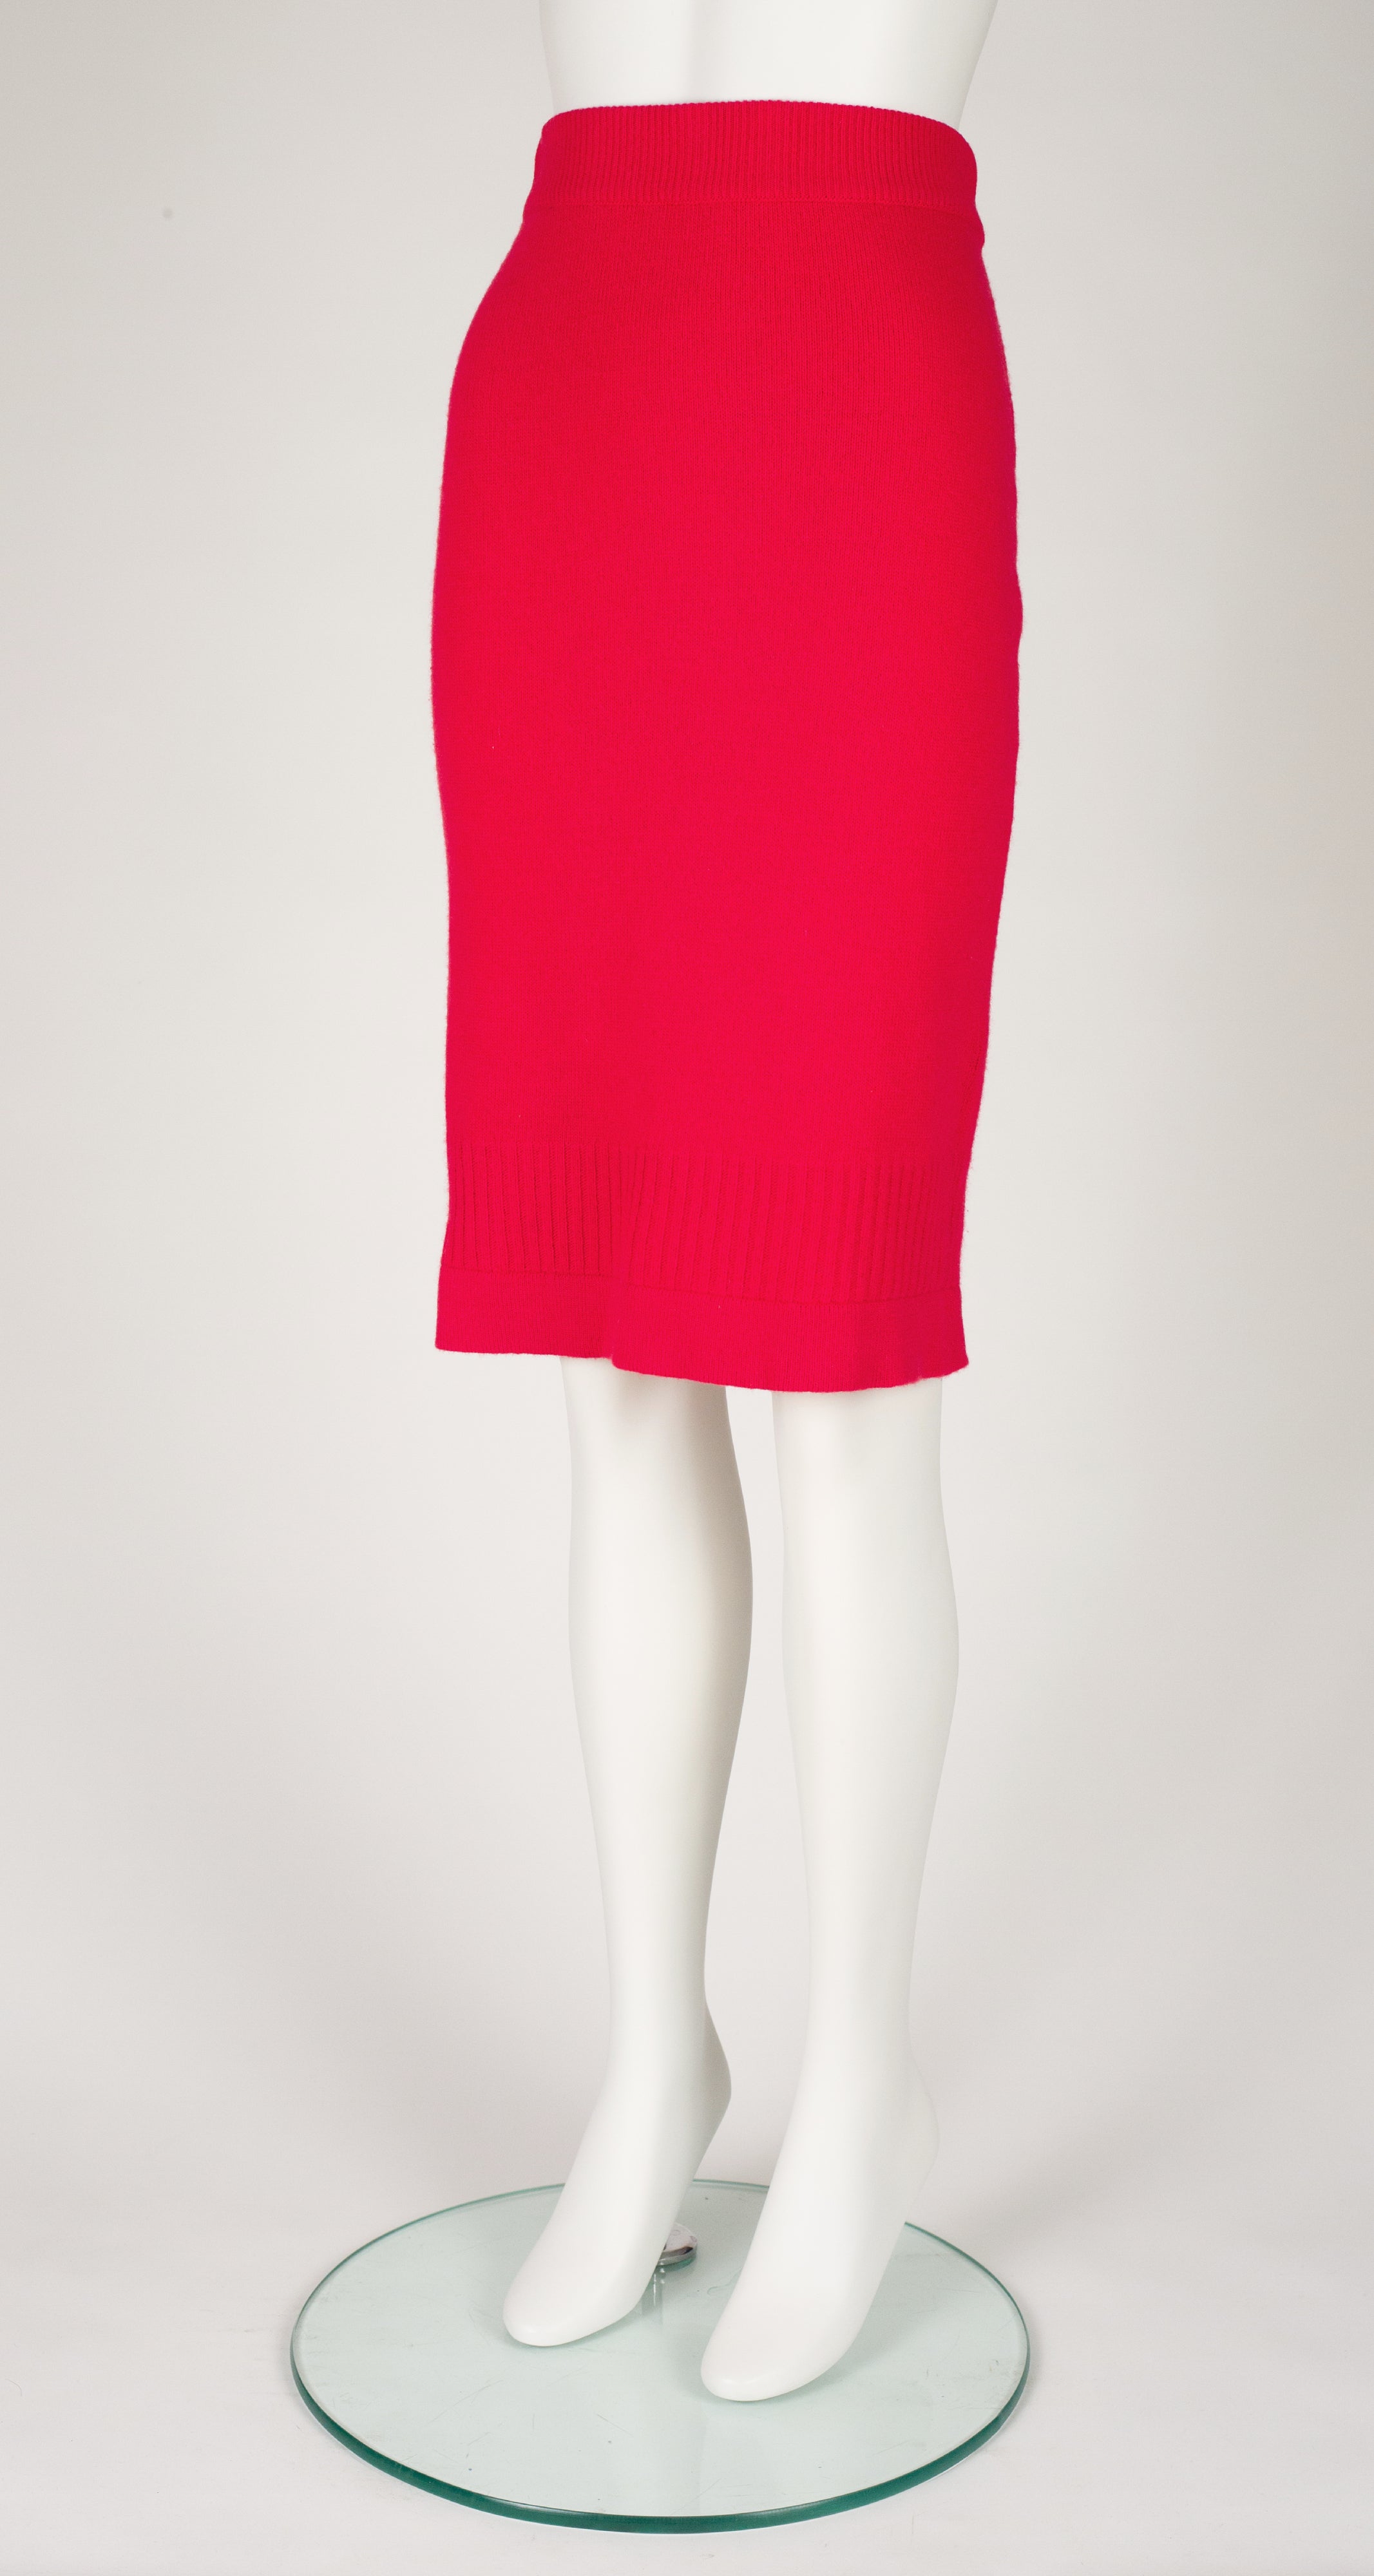 1980s Red Cashmere Knit High-Waisted Pencil Skirt